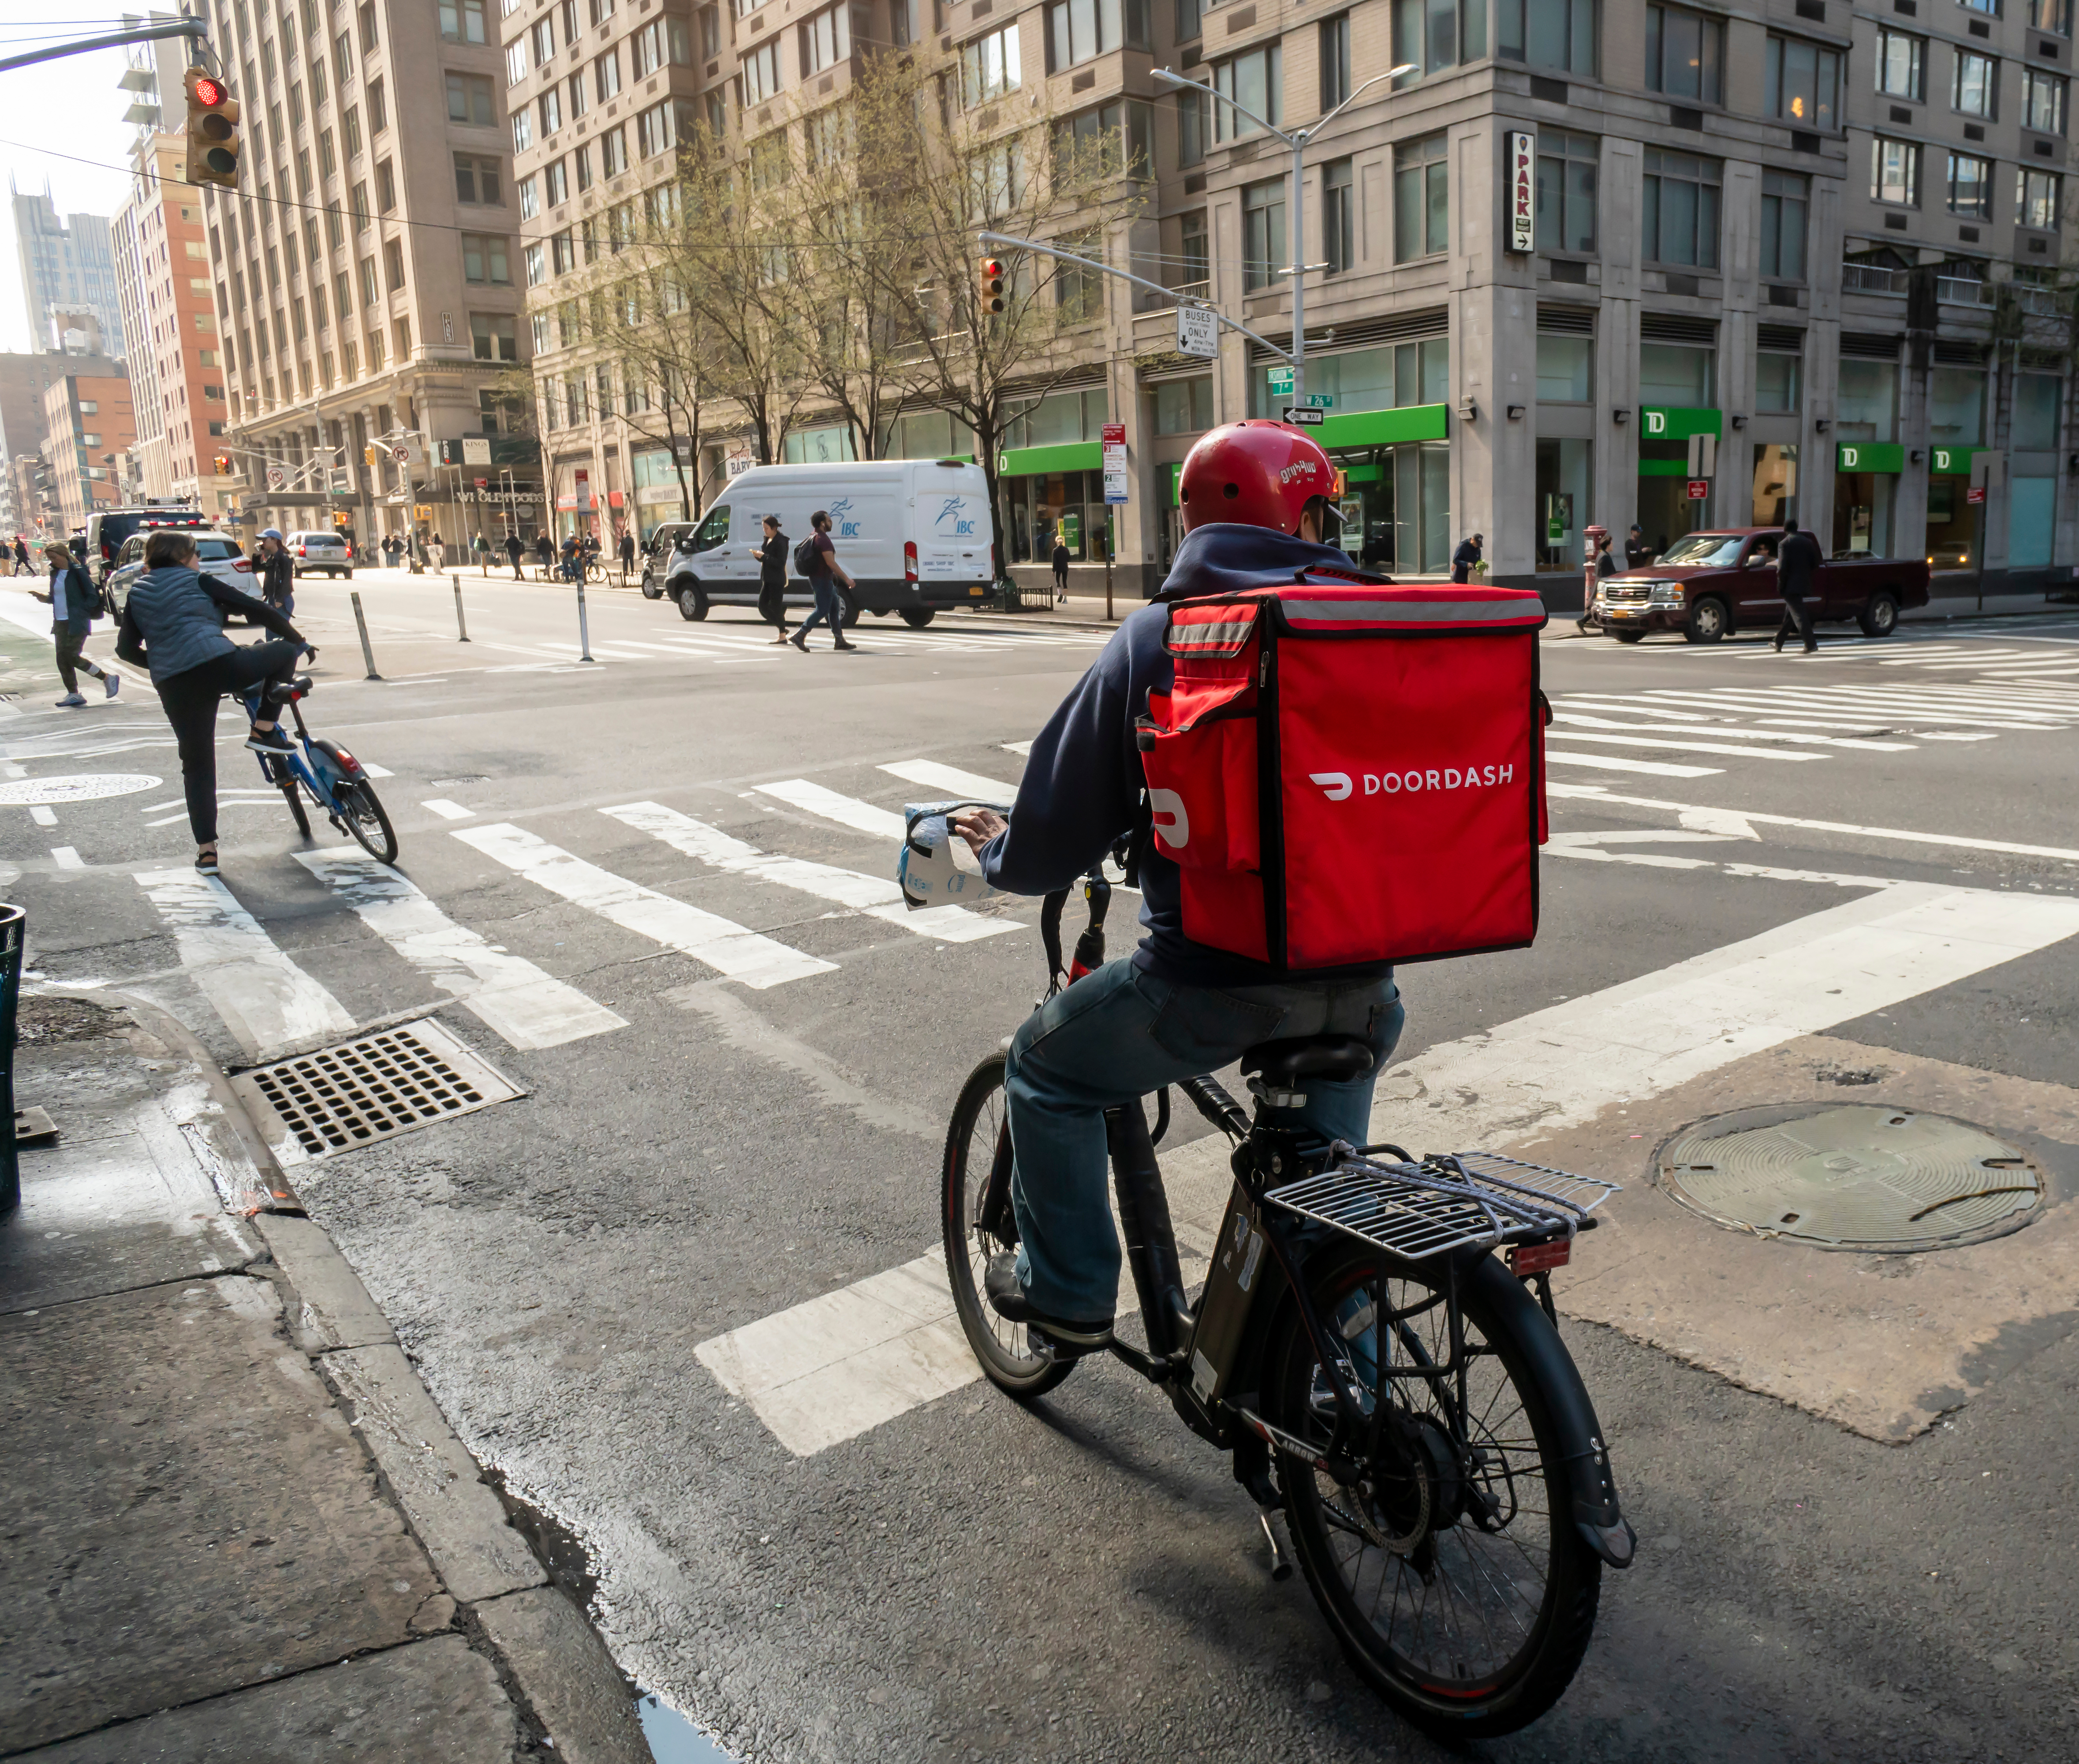 An image of a person riding a bike with a doordash red bag on the back